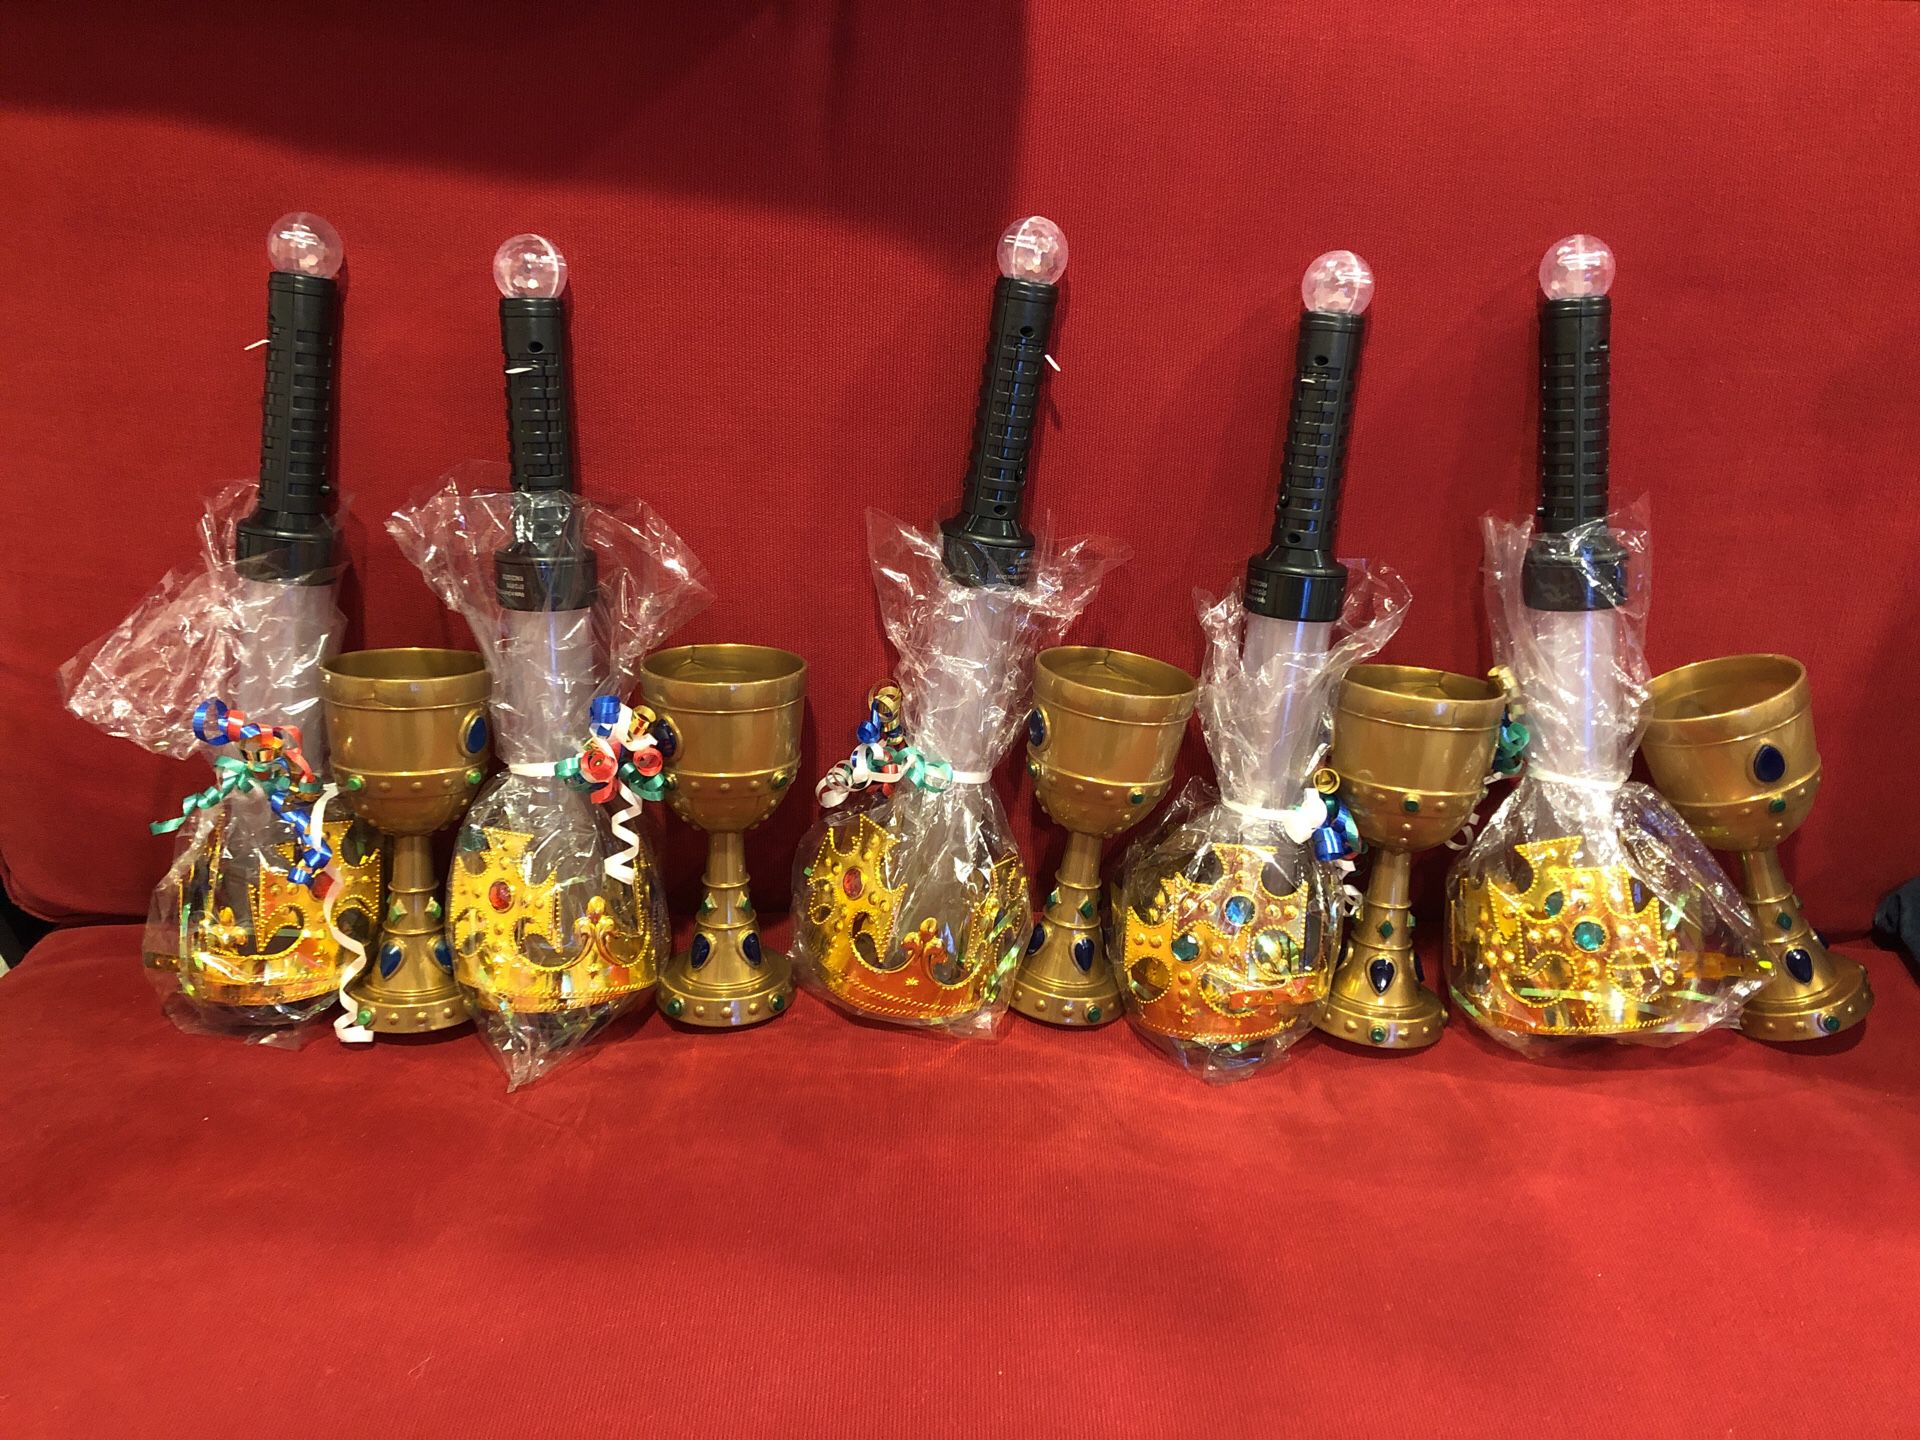 Knight party favors (5) - crown, goblet, light-up sword